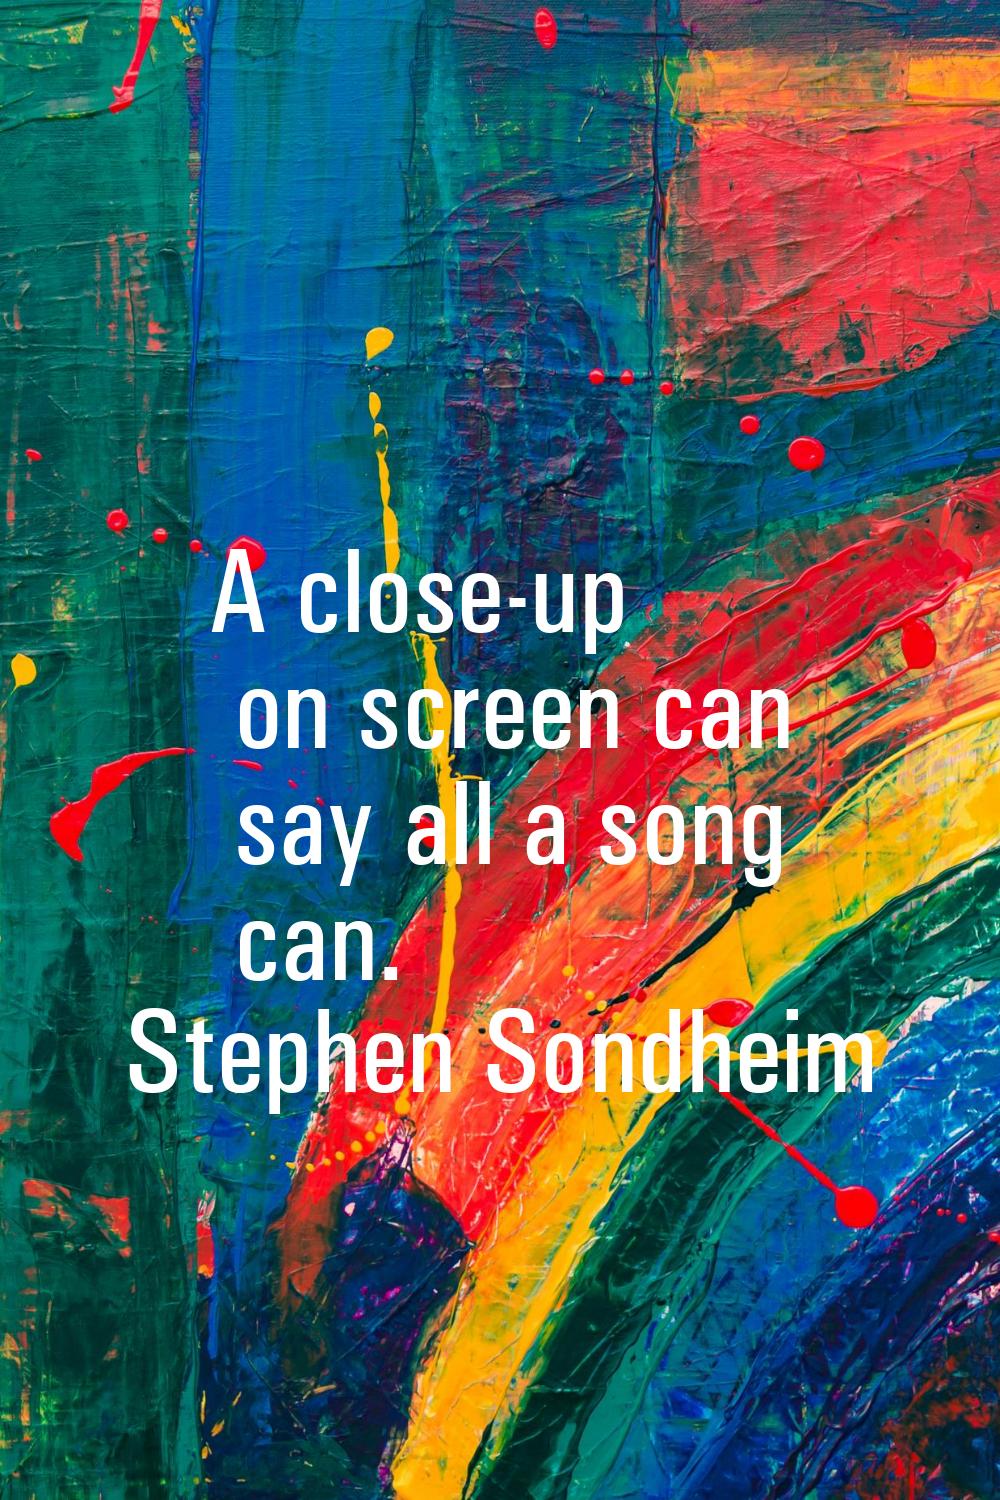 A close-up on screen can say all a song can.